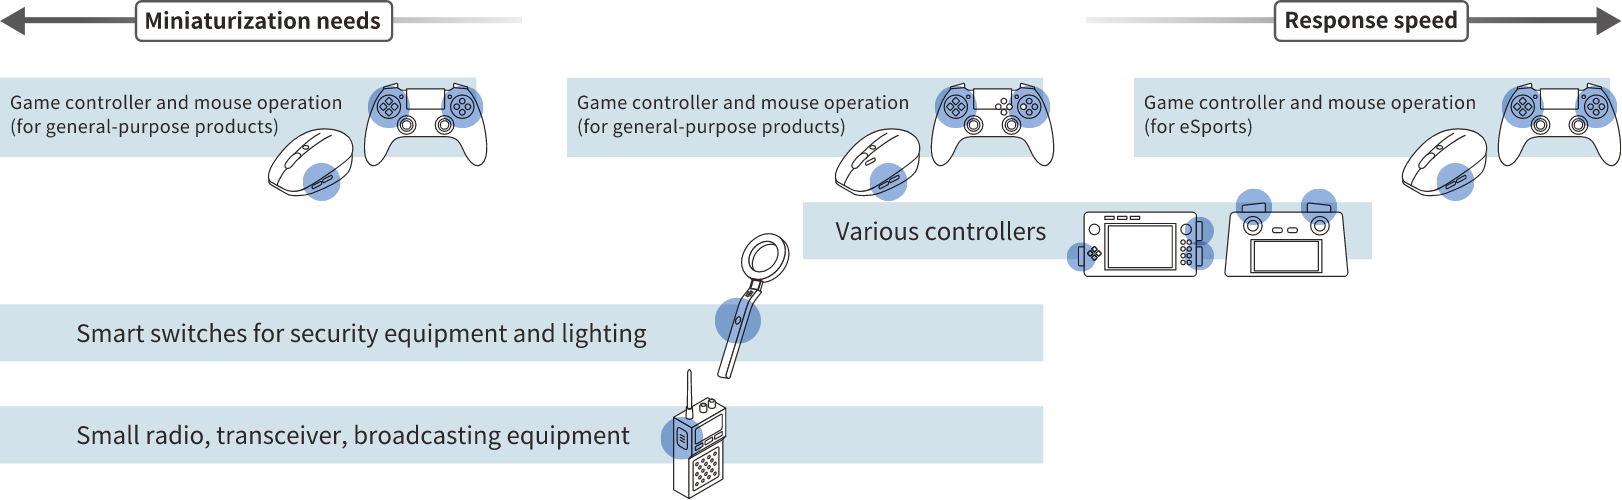 Game controller and mouse operation (for general-purpose products) Smart switches for security equipment and lighting , Small radio, transceiver, broadcasting equipment Game controller and mouse operation (for general-purpose products) Various controllers Response speed Game controller and mouse operation (for eSports) 